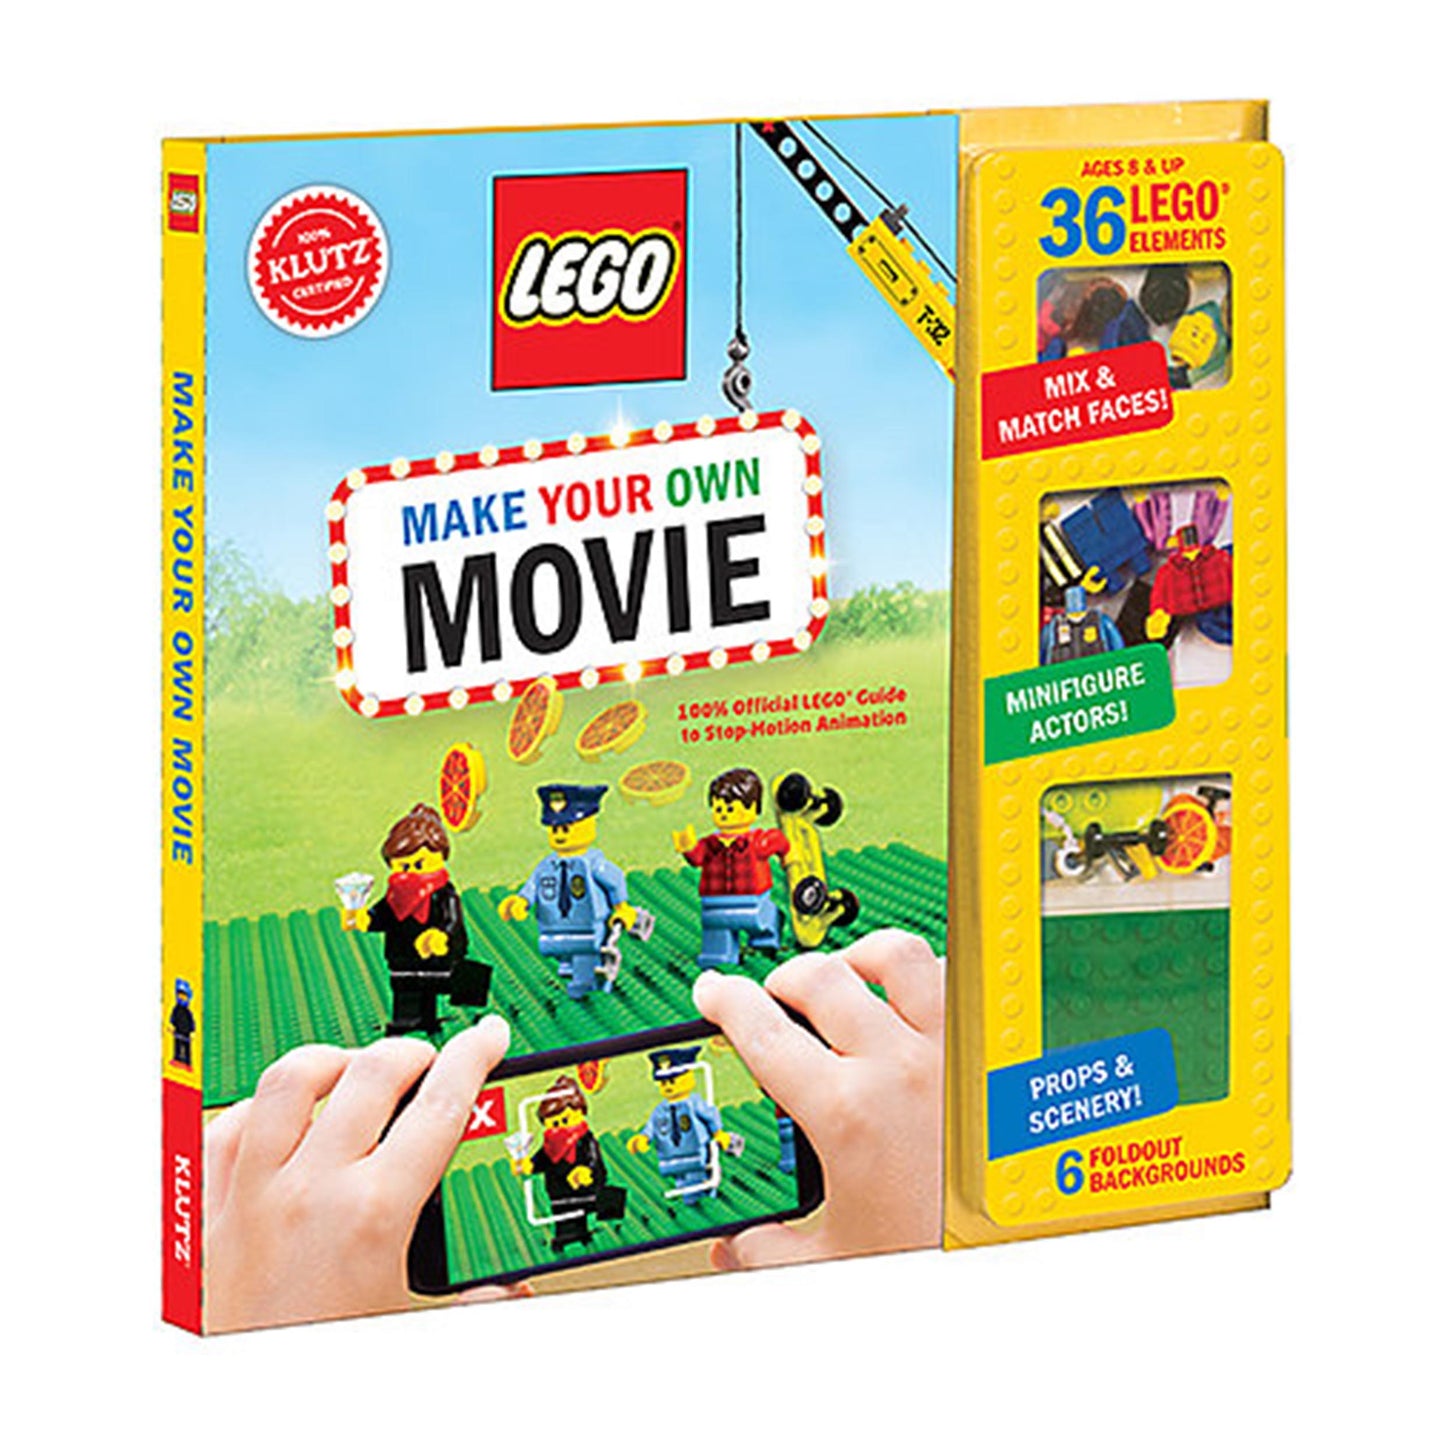 LEGO Make Your Own Movie Kit - by Klutz - K. A. Artist Shop